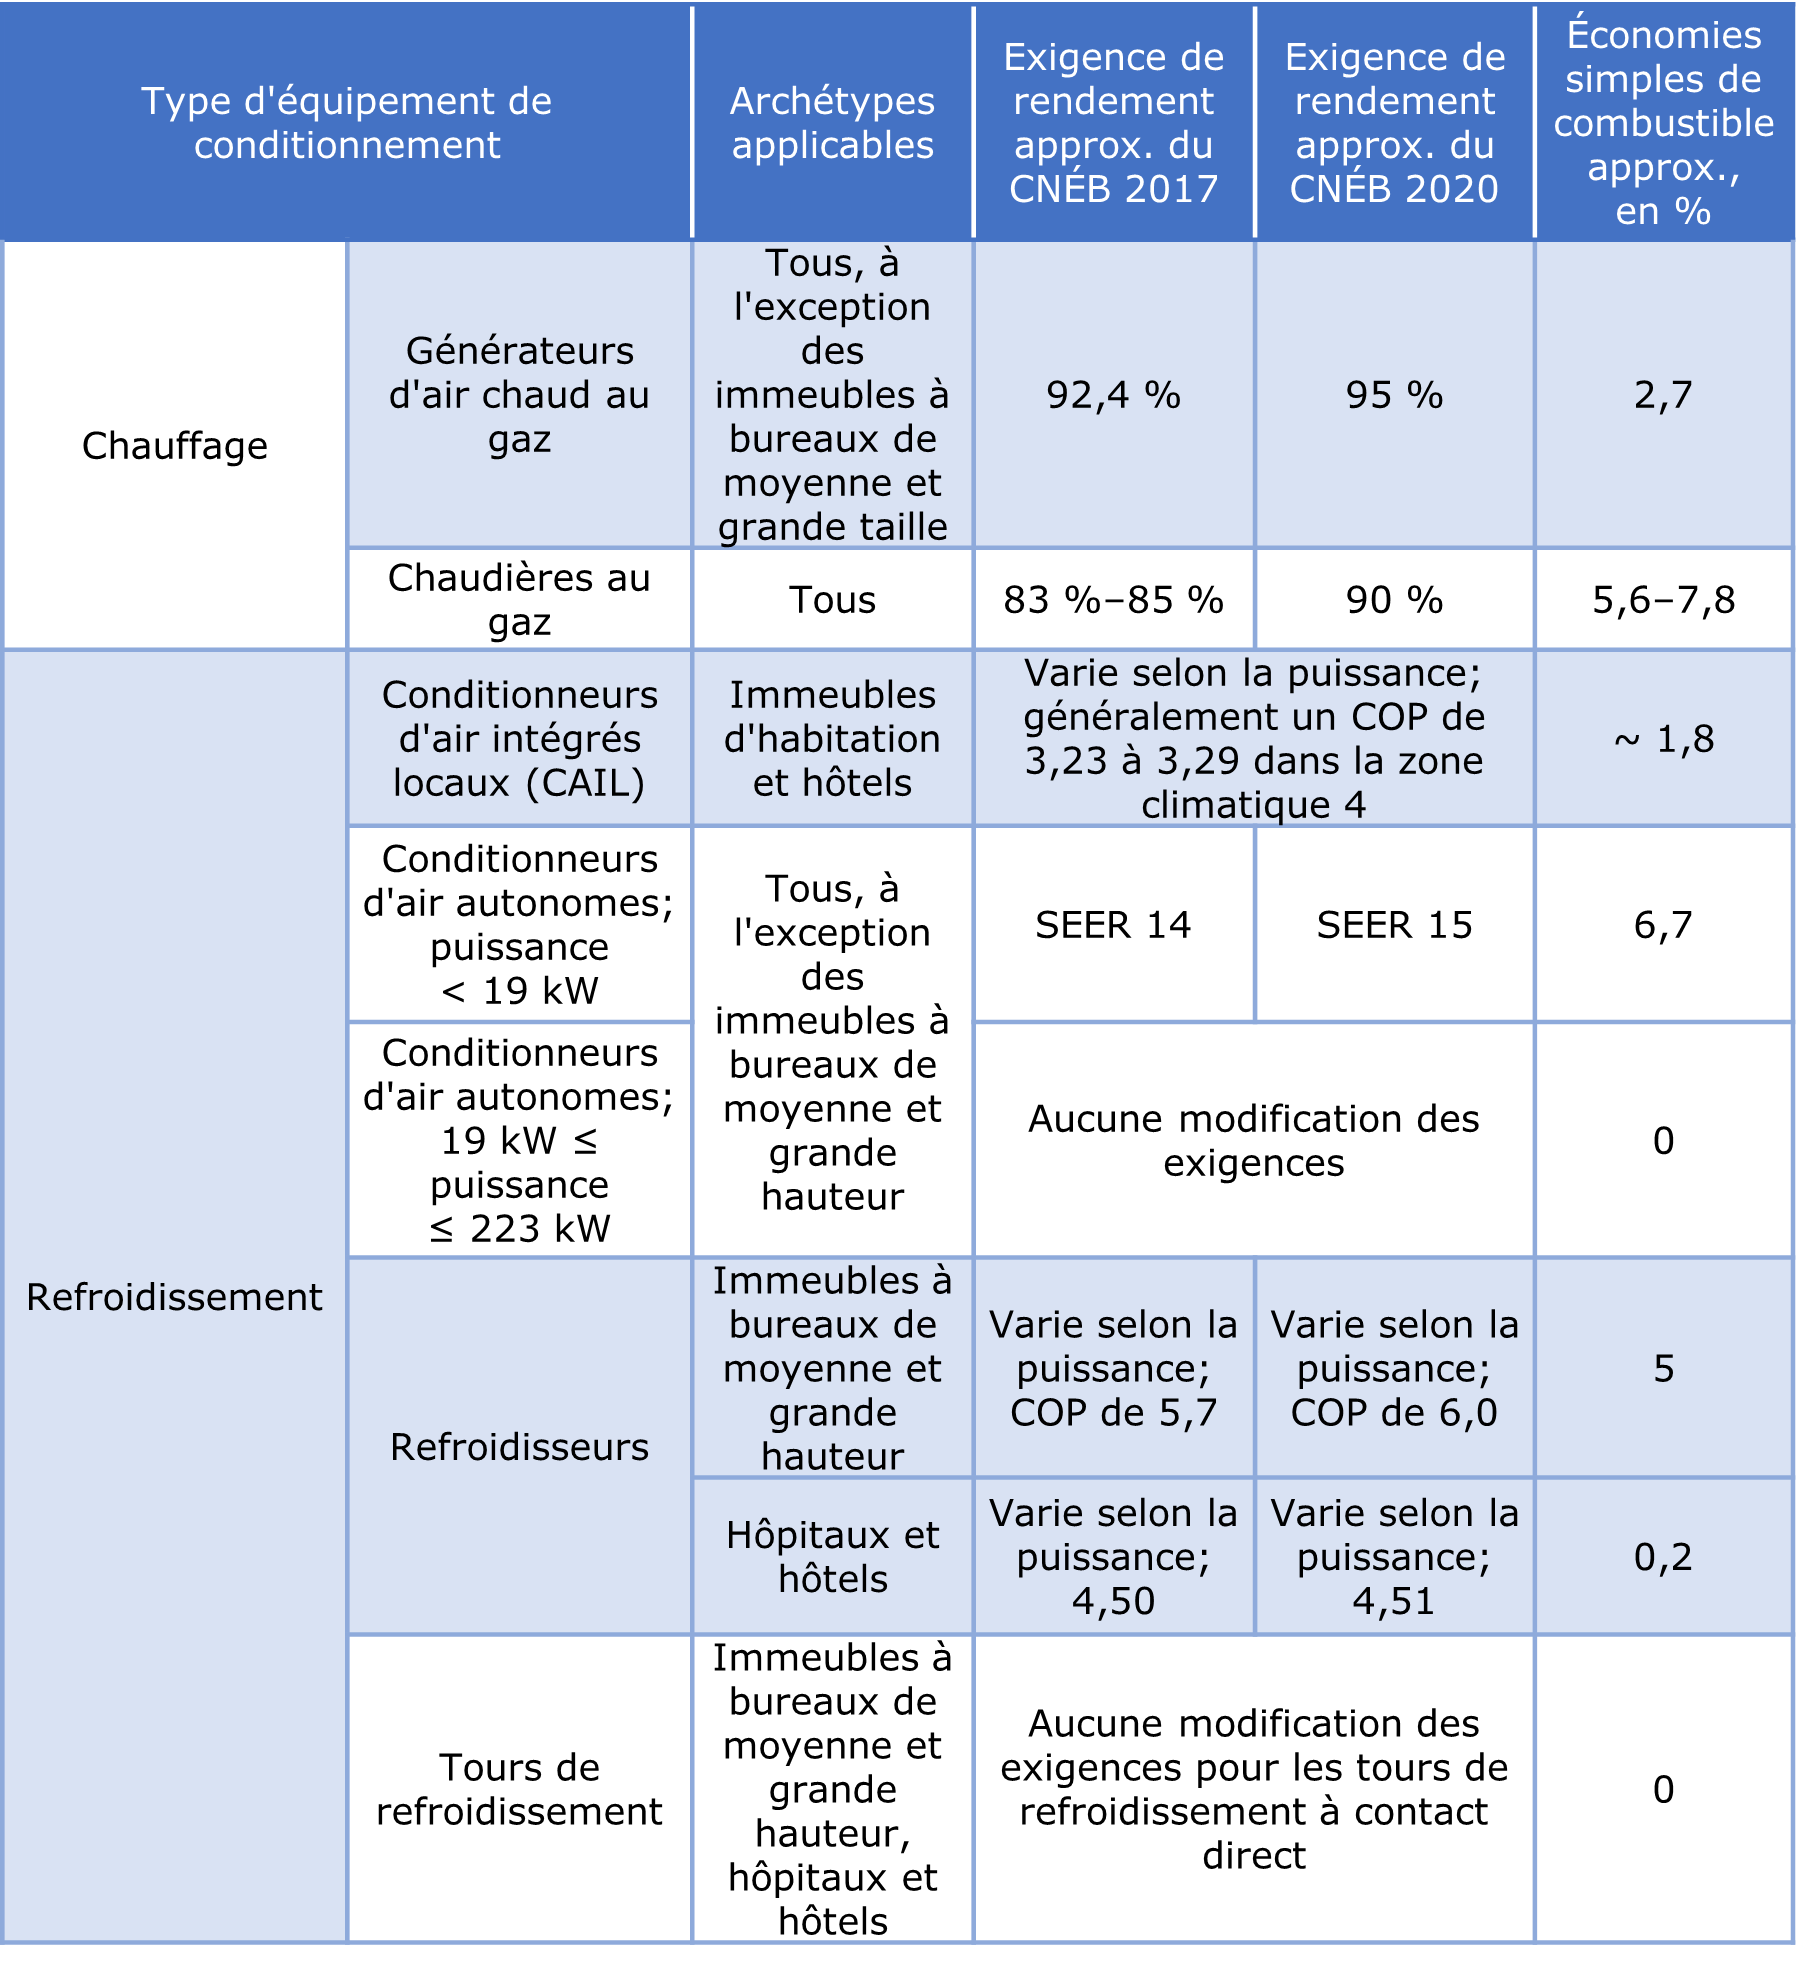 table_1_in_pcf_1859_fr.png